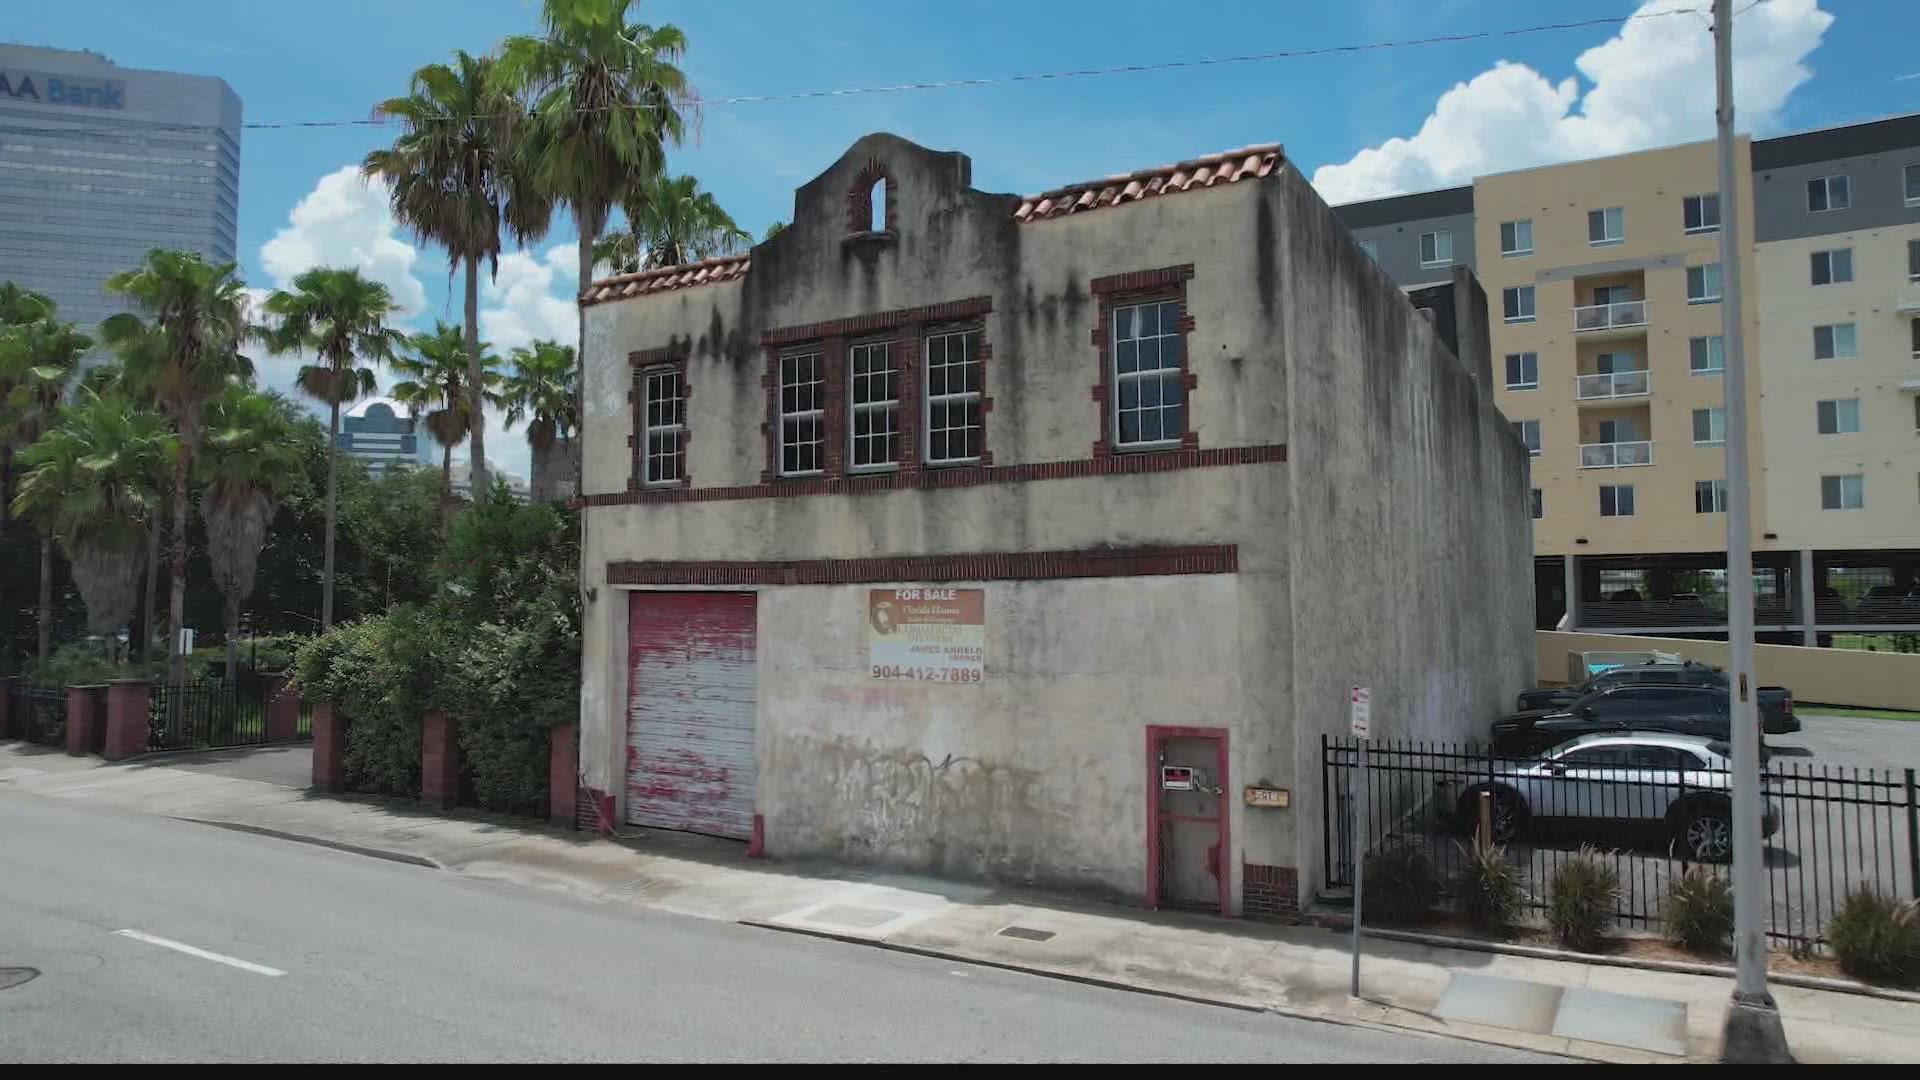 Captain Sandy Yawn of Bravo's "Below Deck Mediterranean" wants to put a restaurant in a historic building in downtown Jacksonville.